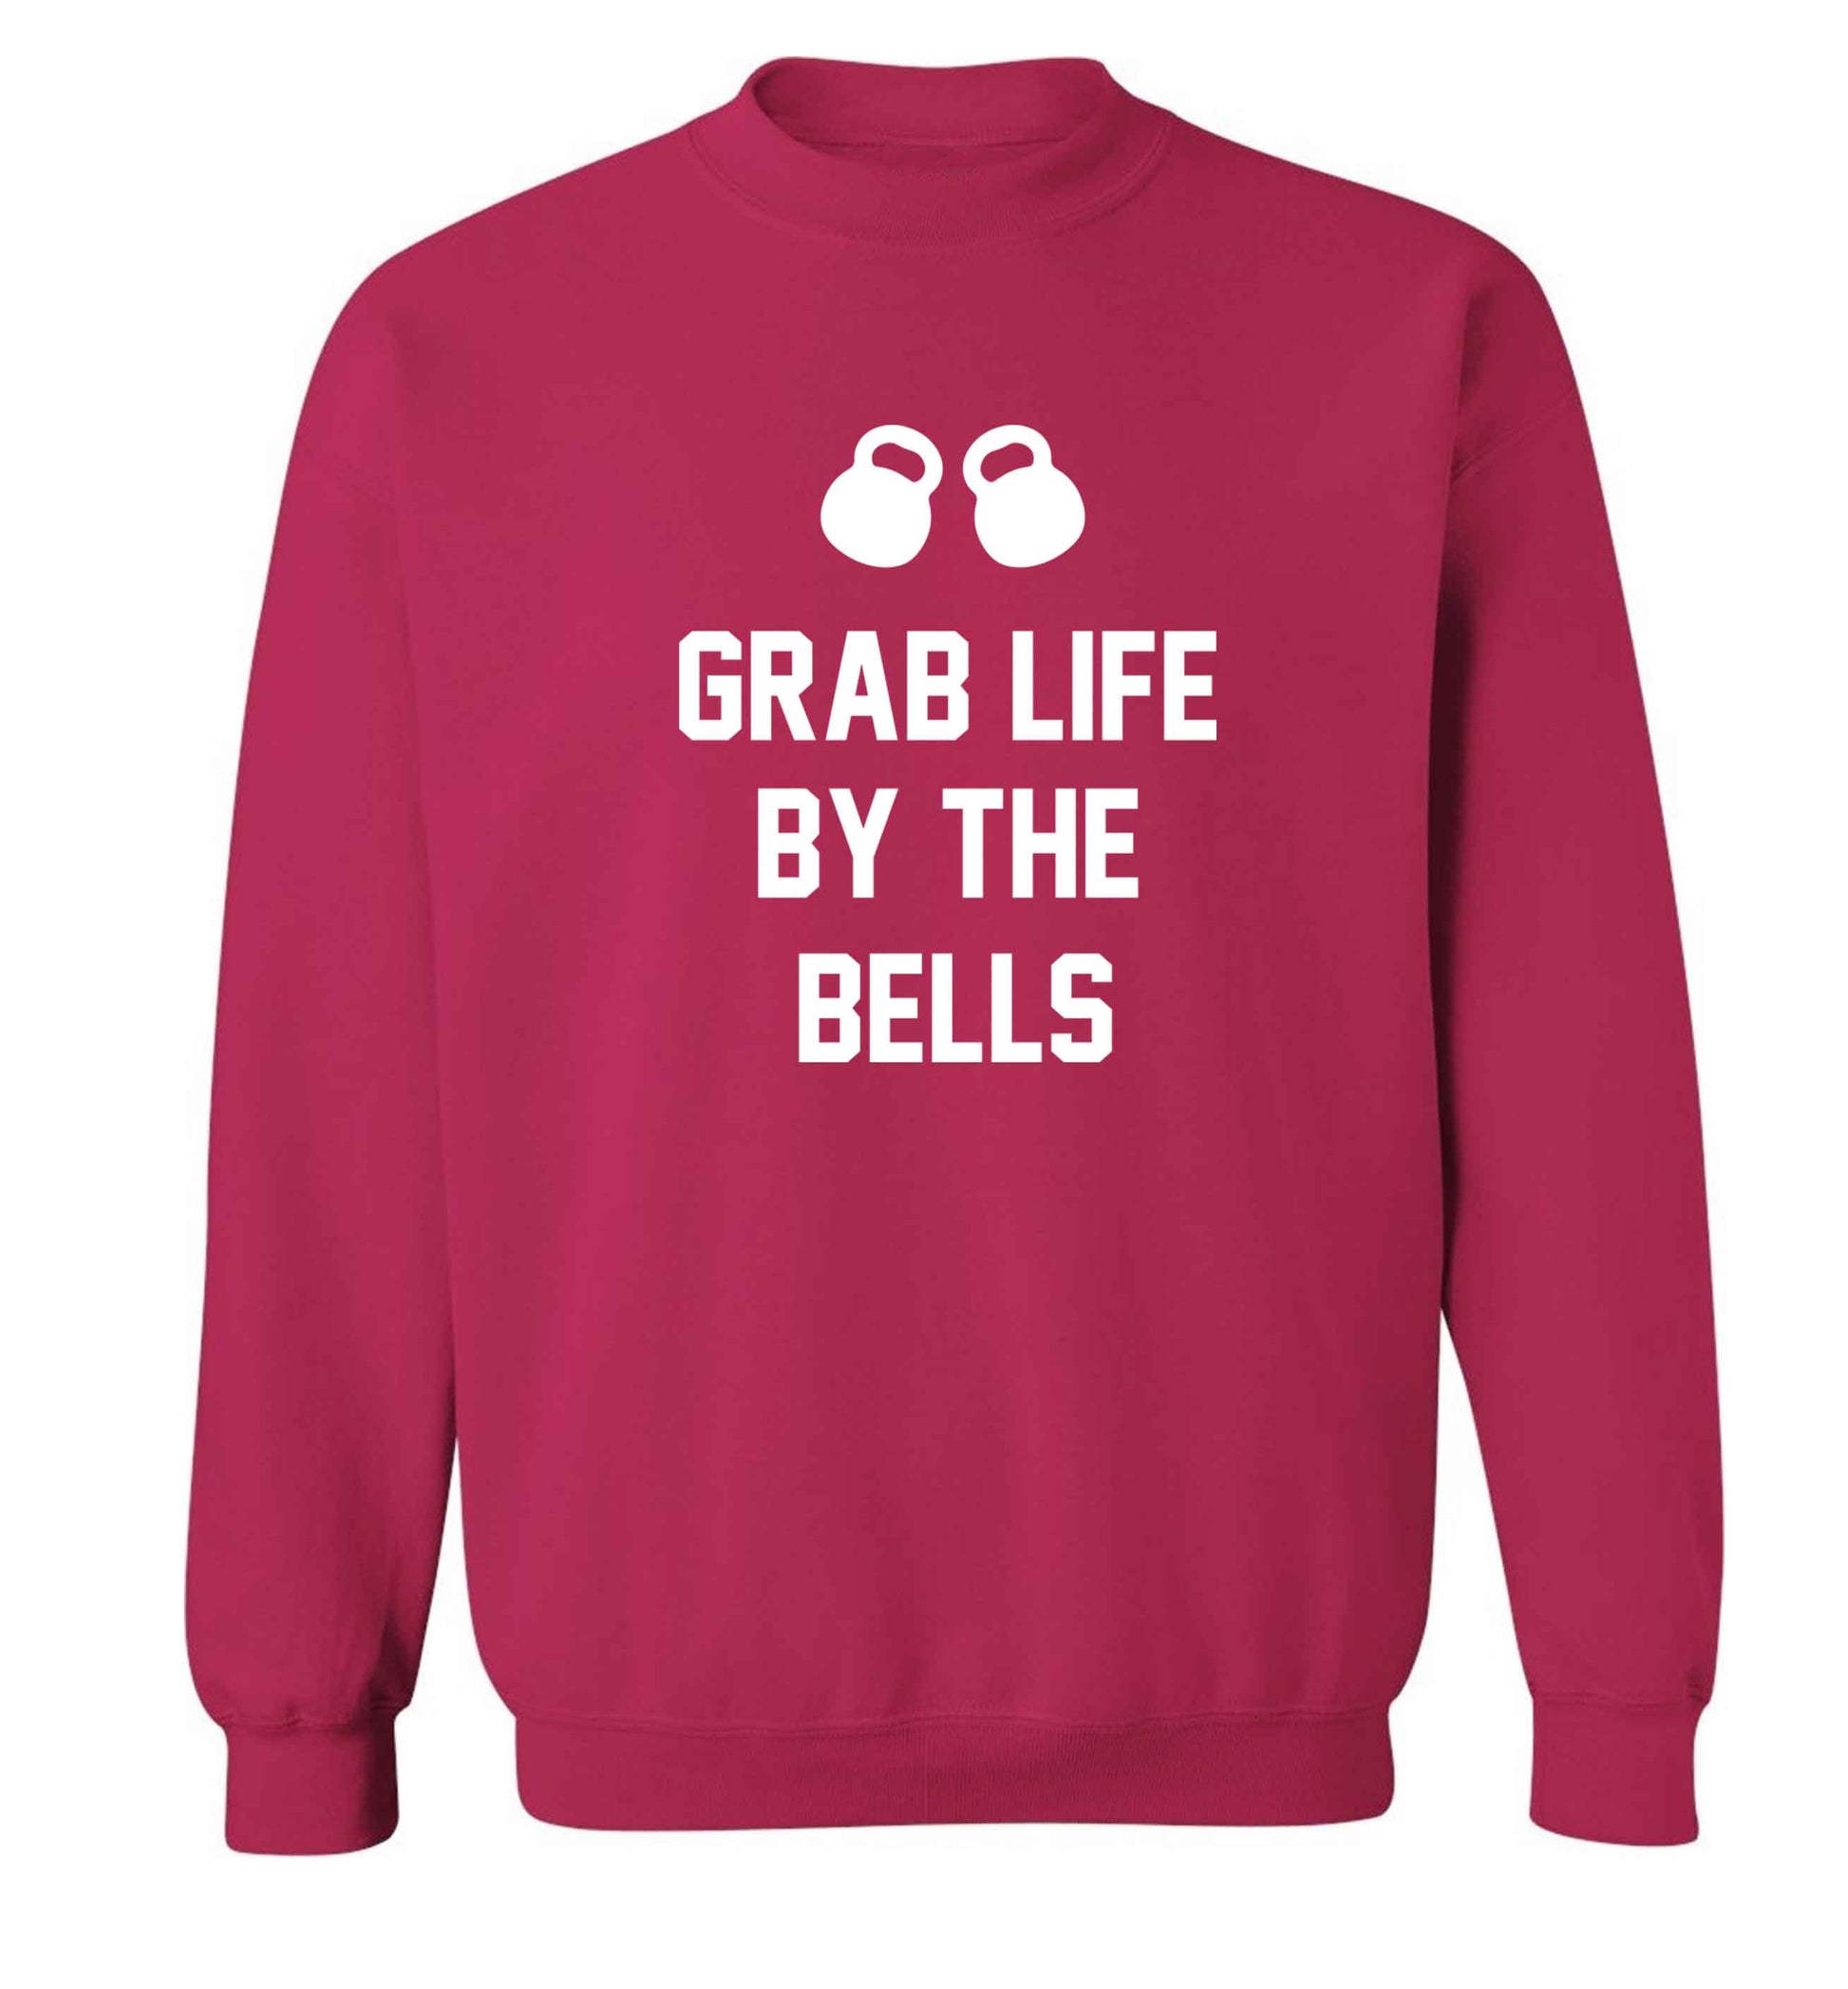 Grab life by the bells adult's unisex pink sweater 2XL